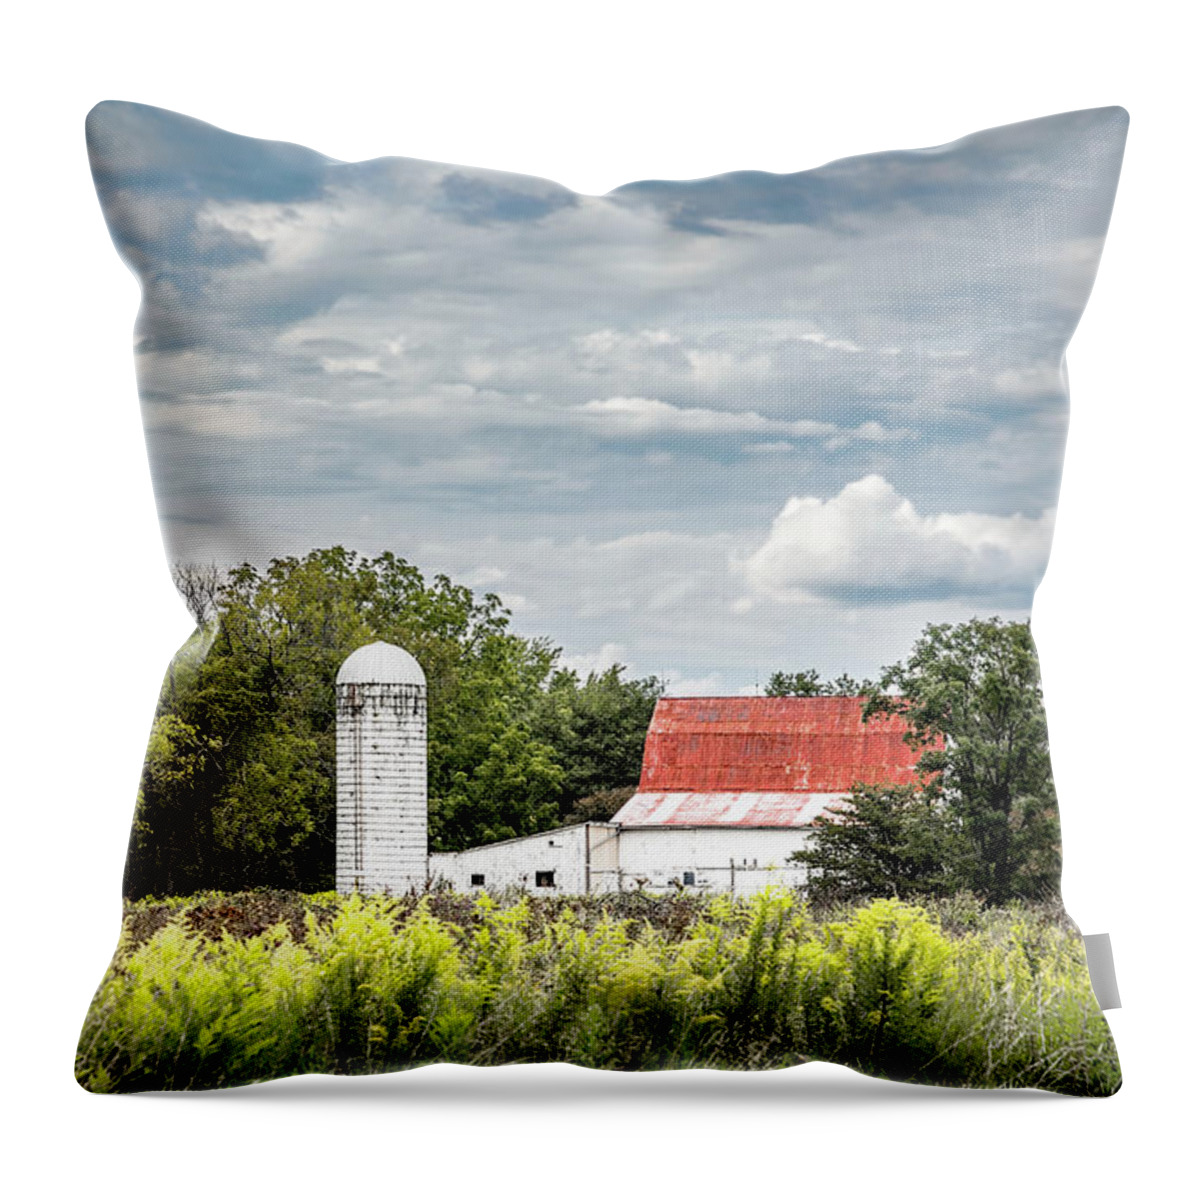 Rusted Throw Pillow featuring the photograph Red Tin Roof by Tom Mc Nemar